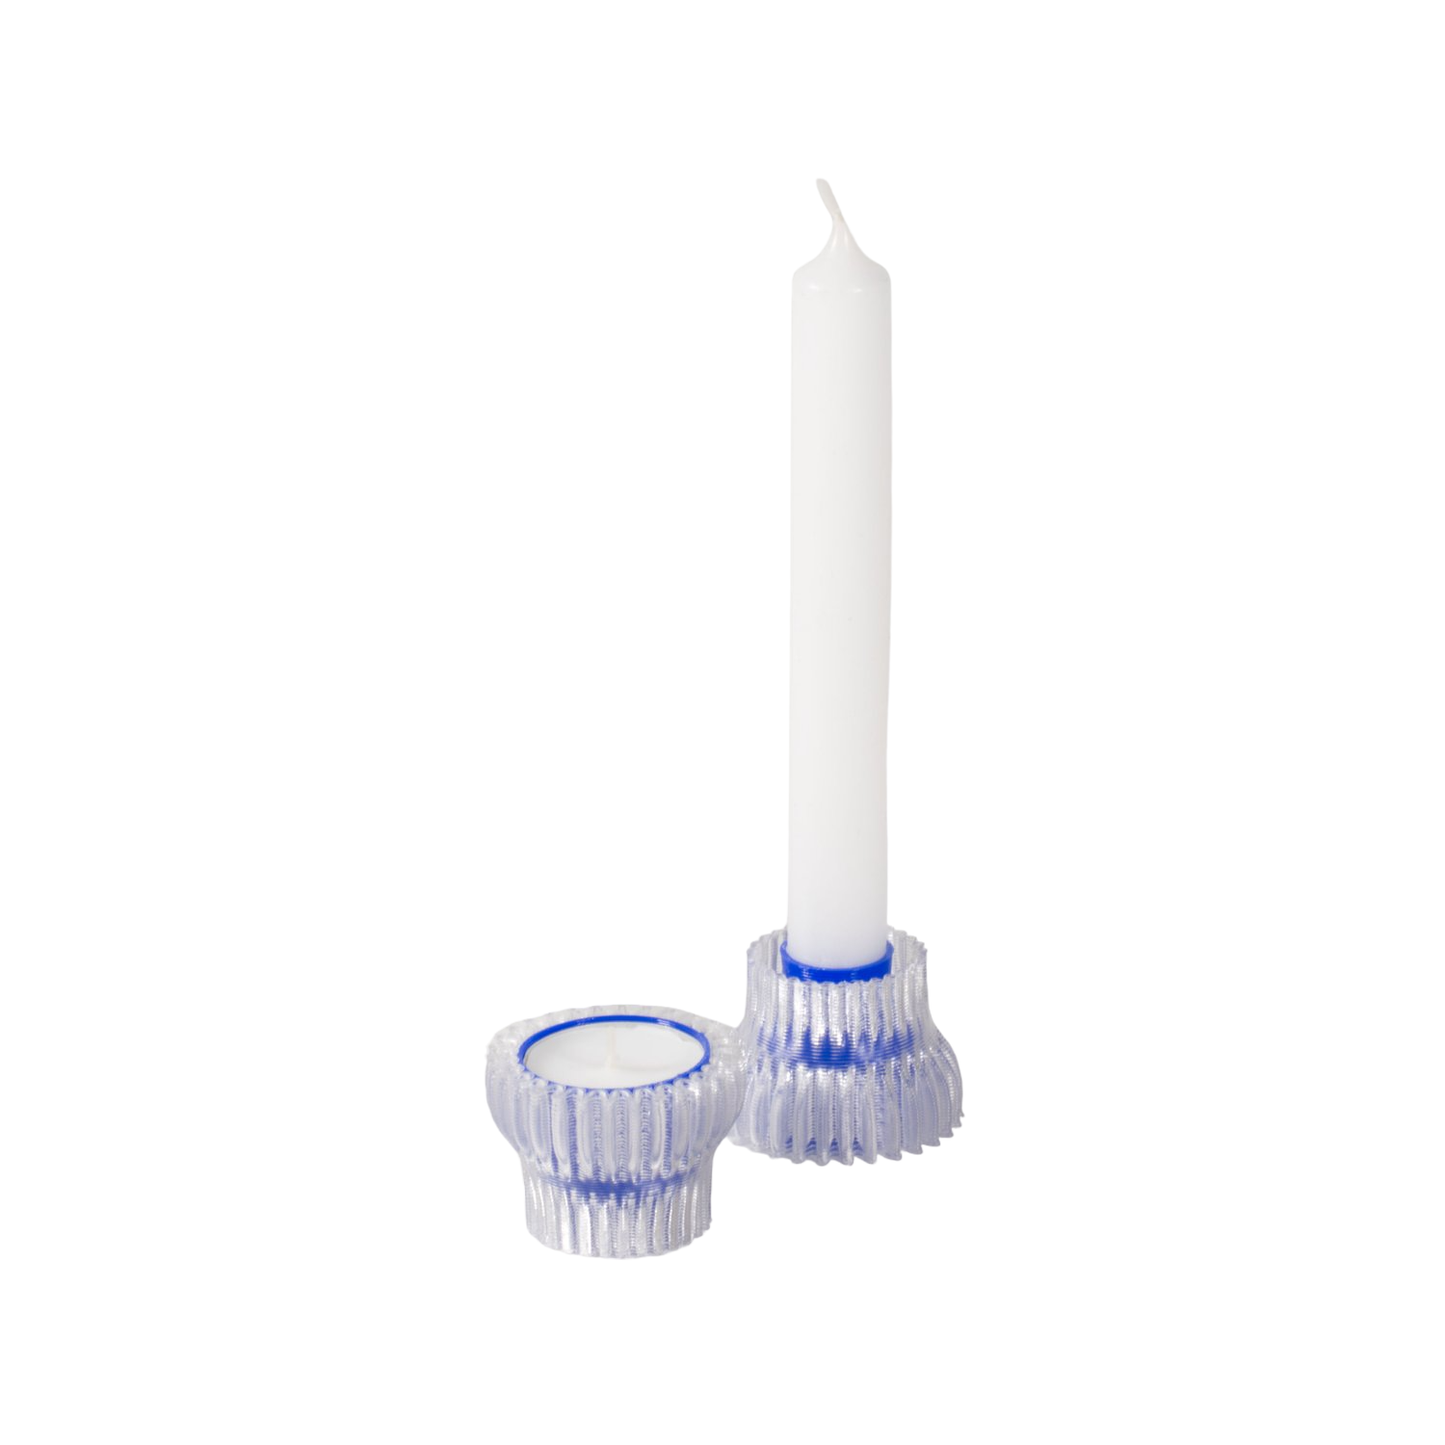 Double candle holder 2.20 | Blue